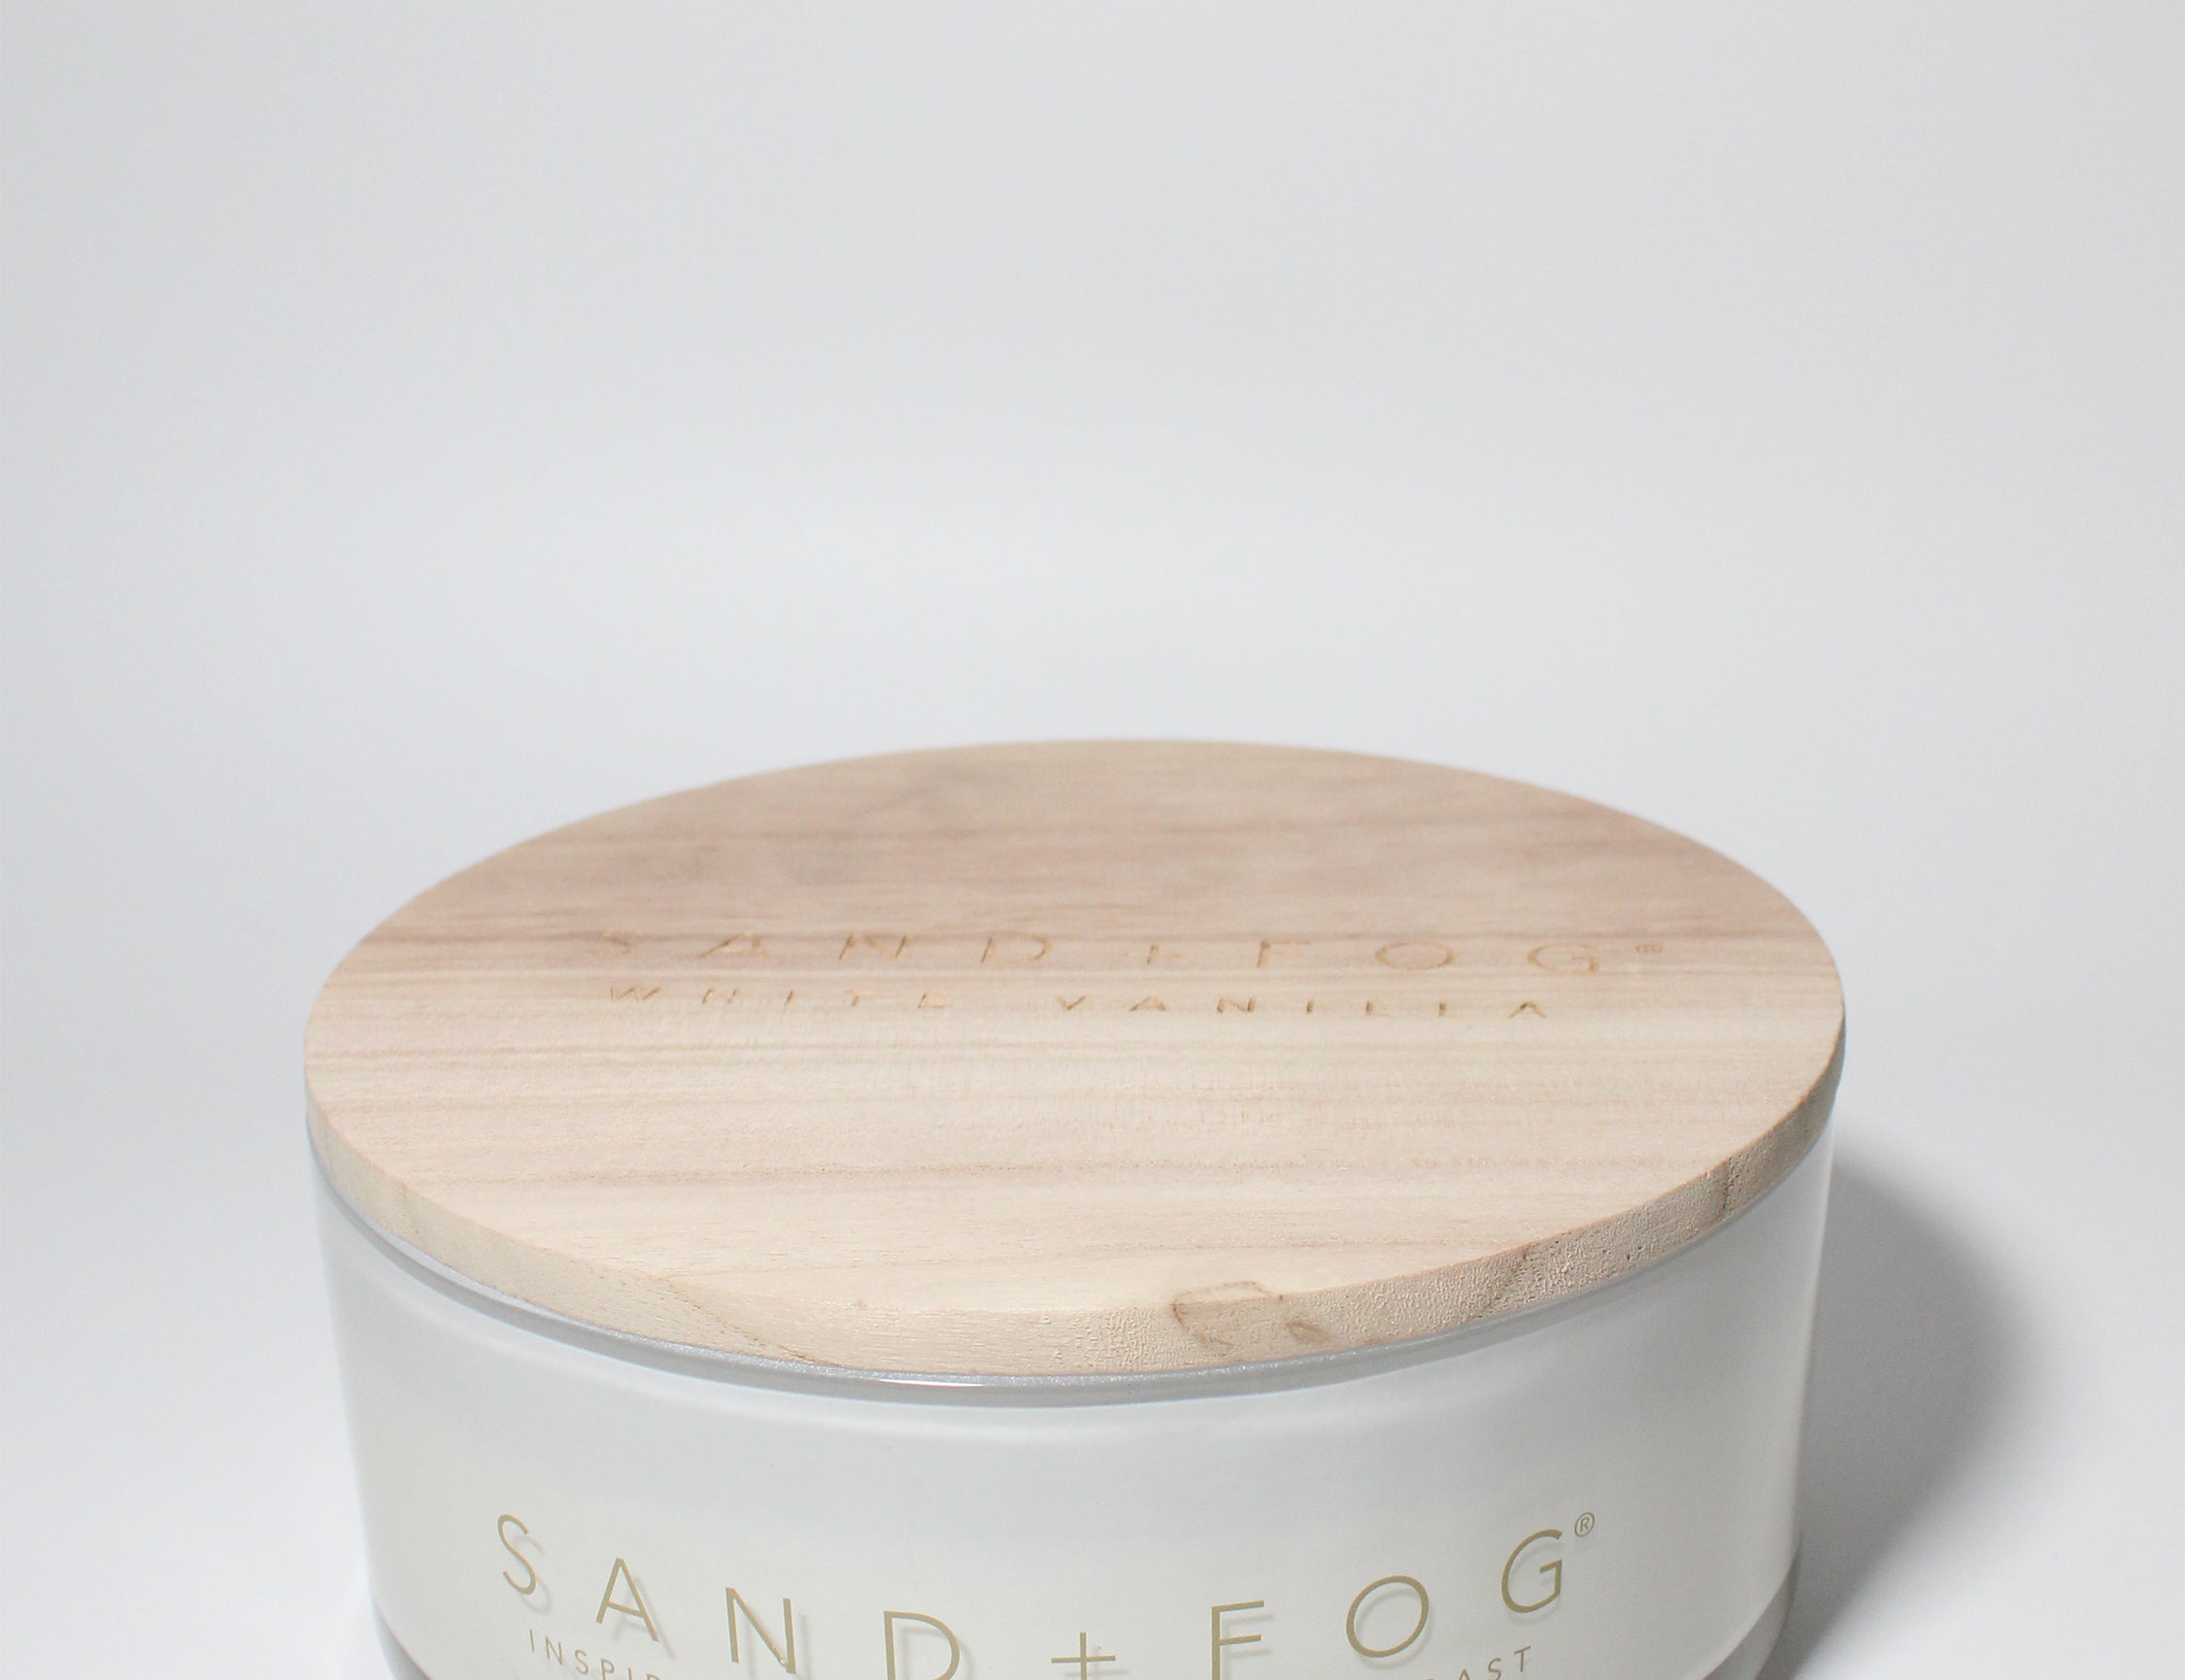 White Vanilla 35 oz scented candle White vessel with Sand+Fog wood lid